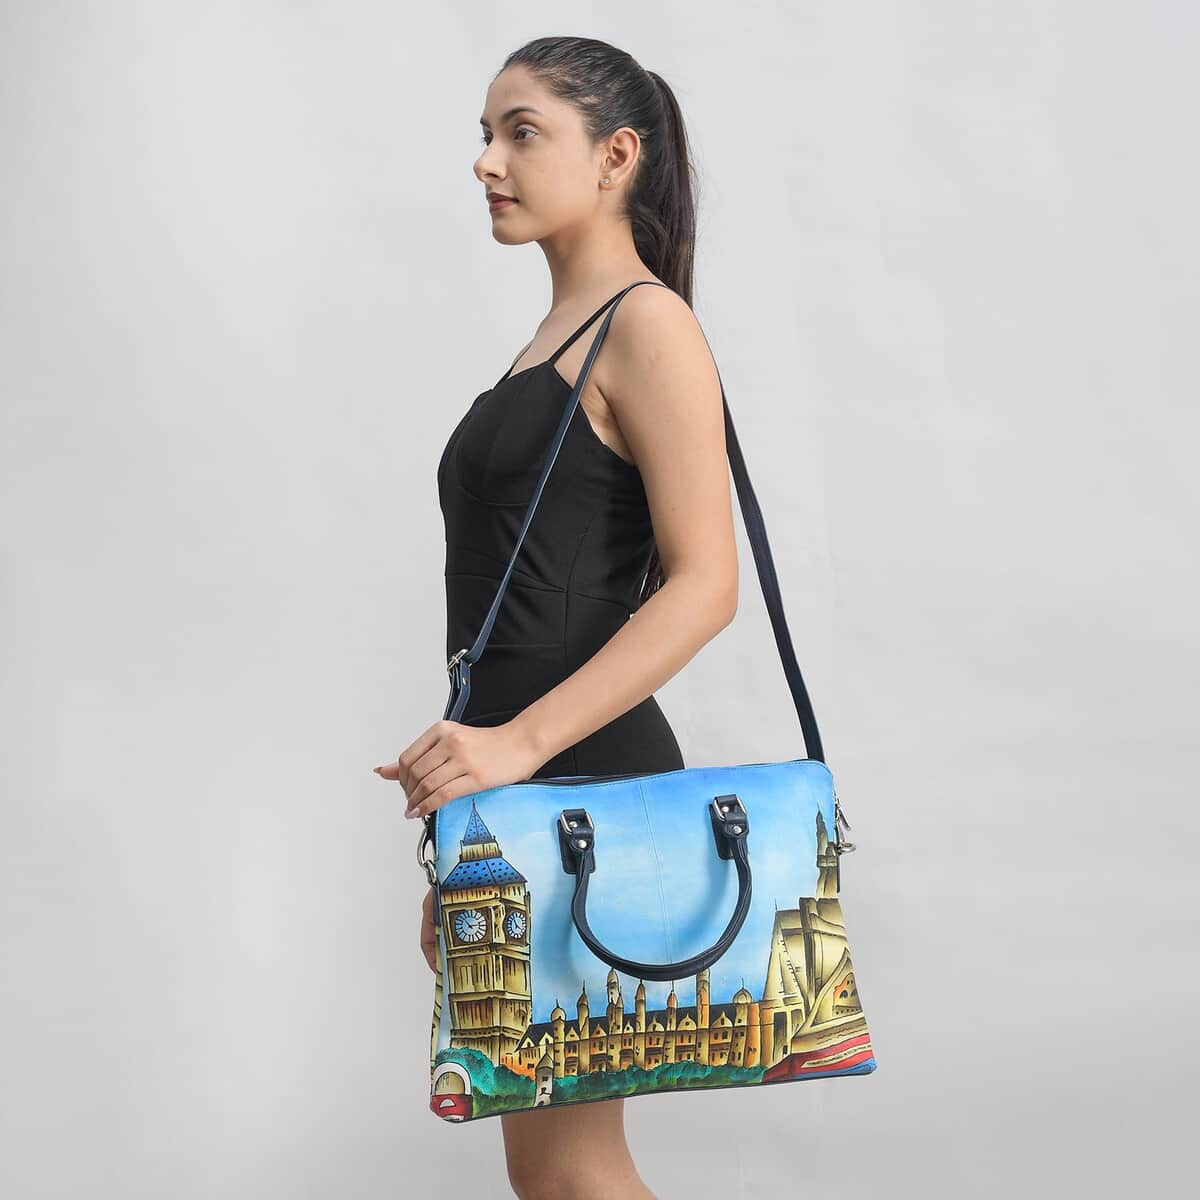 "SUKRITI 100% Genuine Leather Ladies Shoulder Tote Bag (Theme: London City Clock Tower View) Color: Blue Size: 16.5(L)x12.5(H)x3(W) inches" image number 1